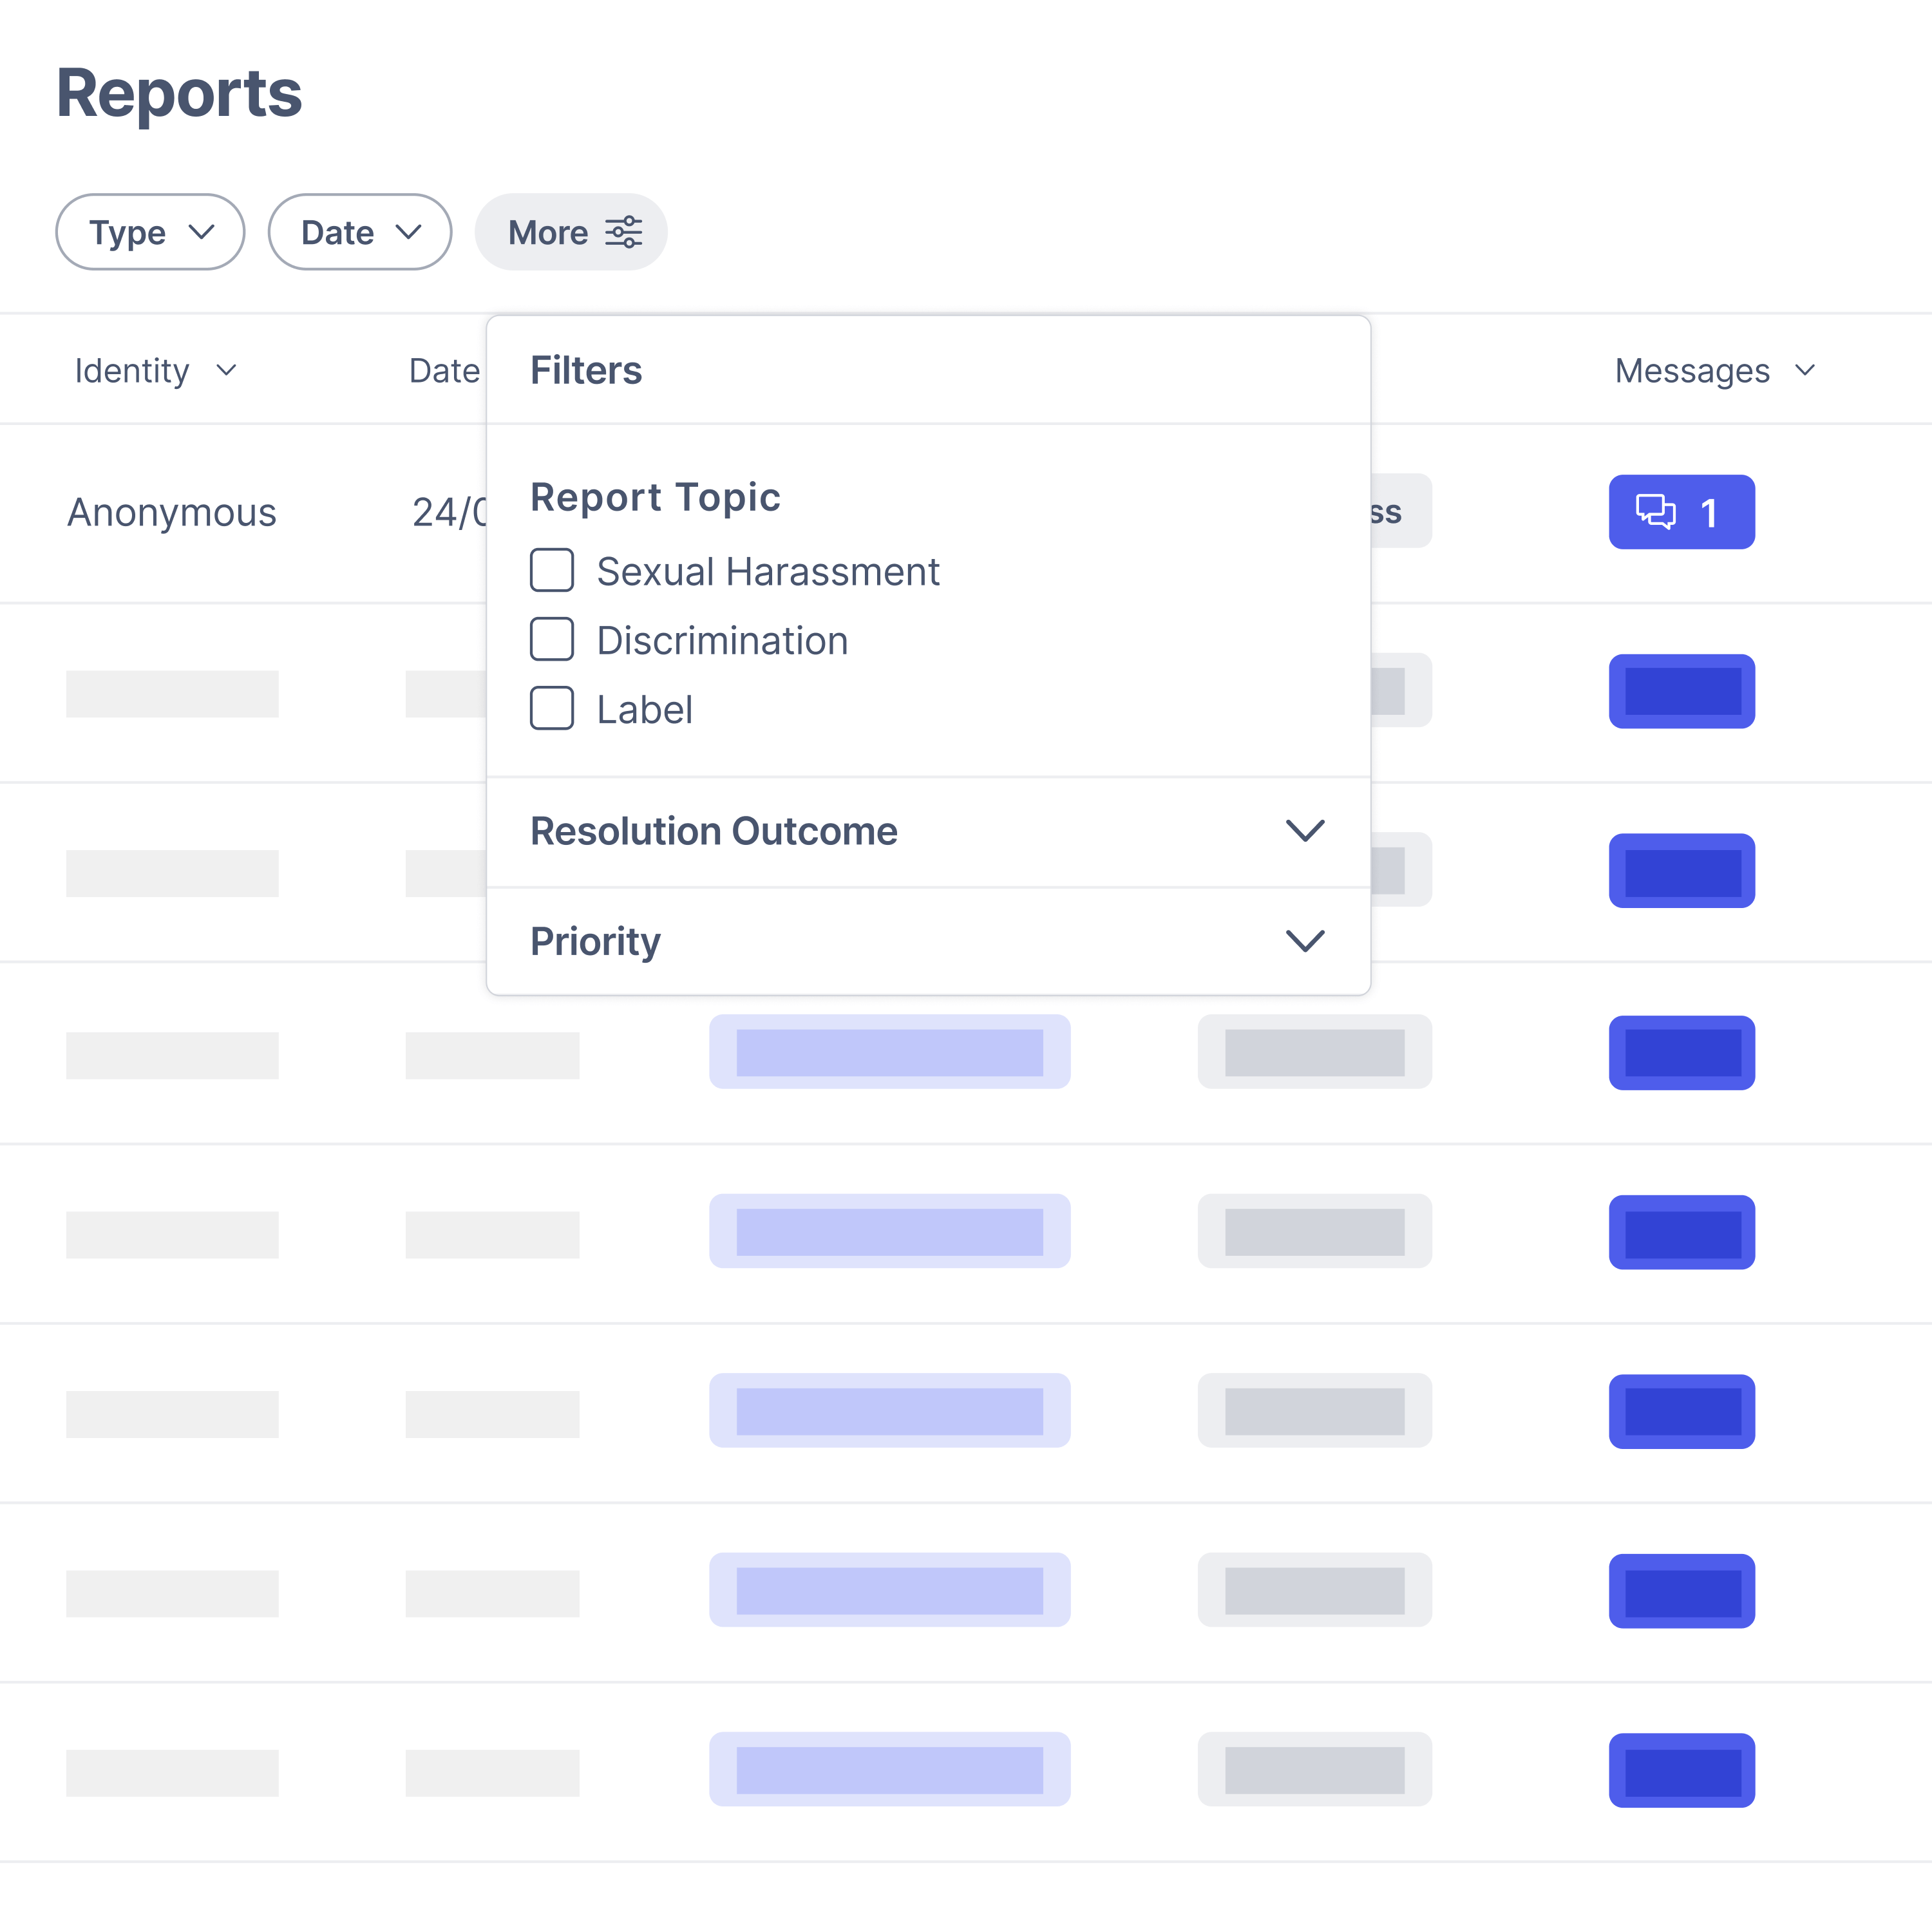 Sort and filter reports